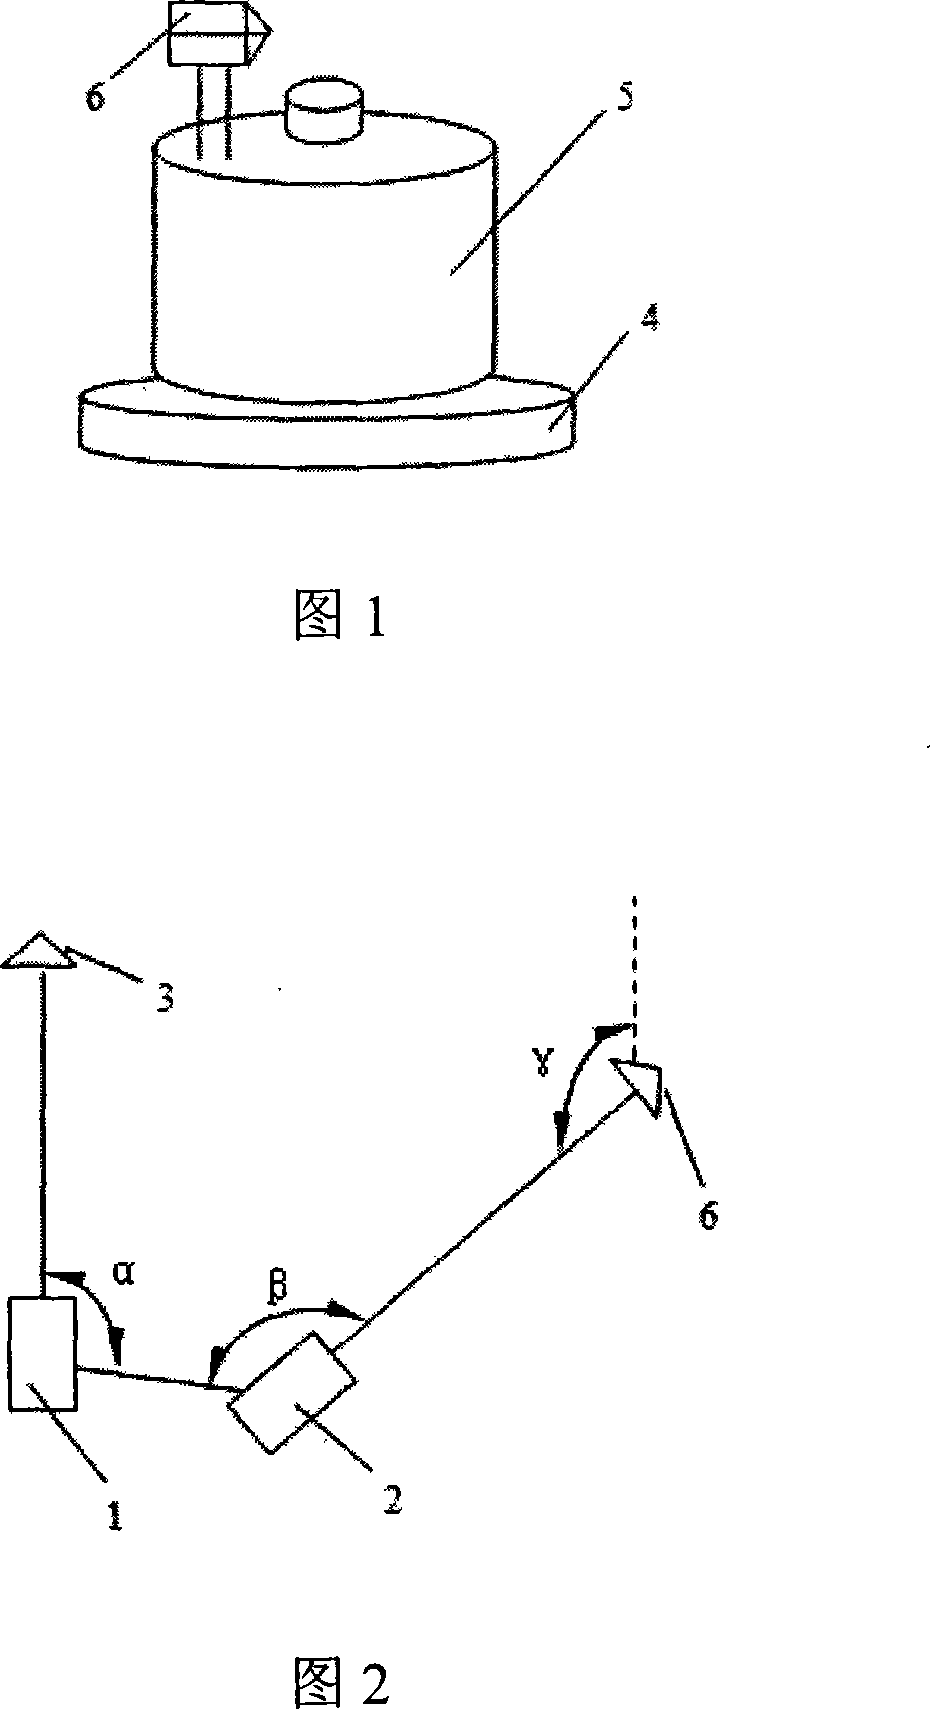 Multi-position strapping north-seeking system direction effect calibration method